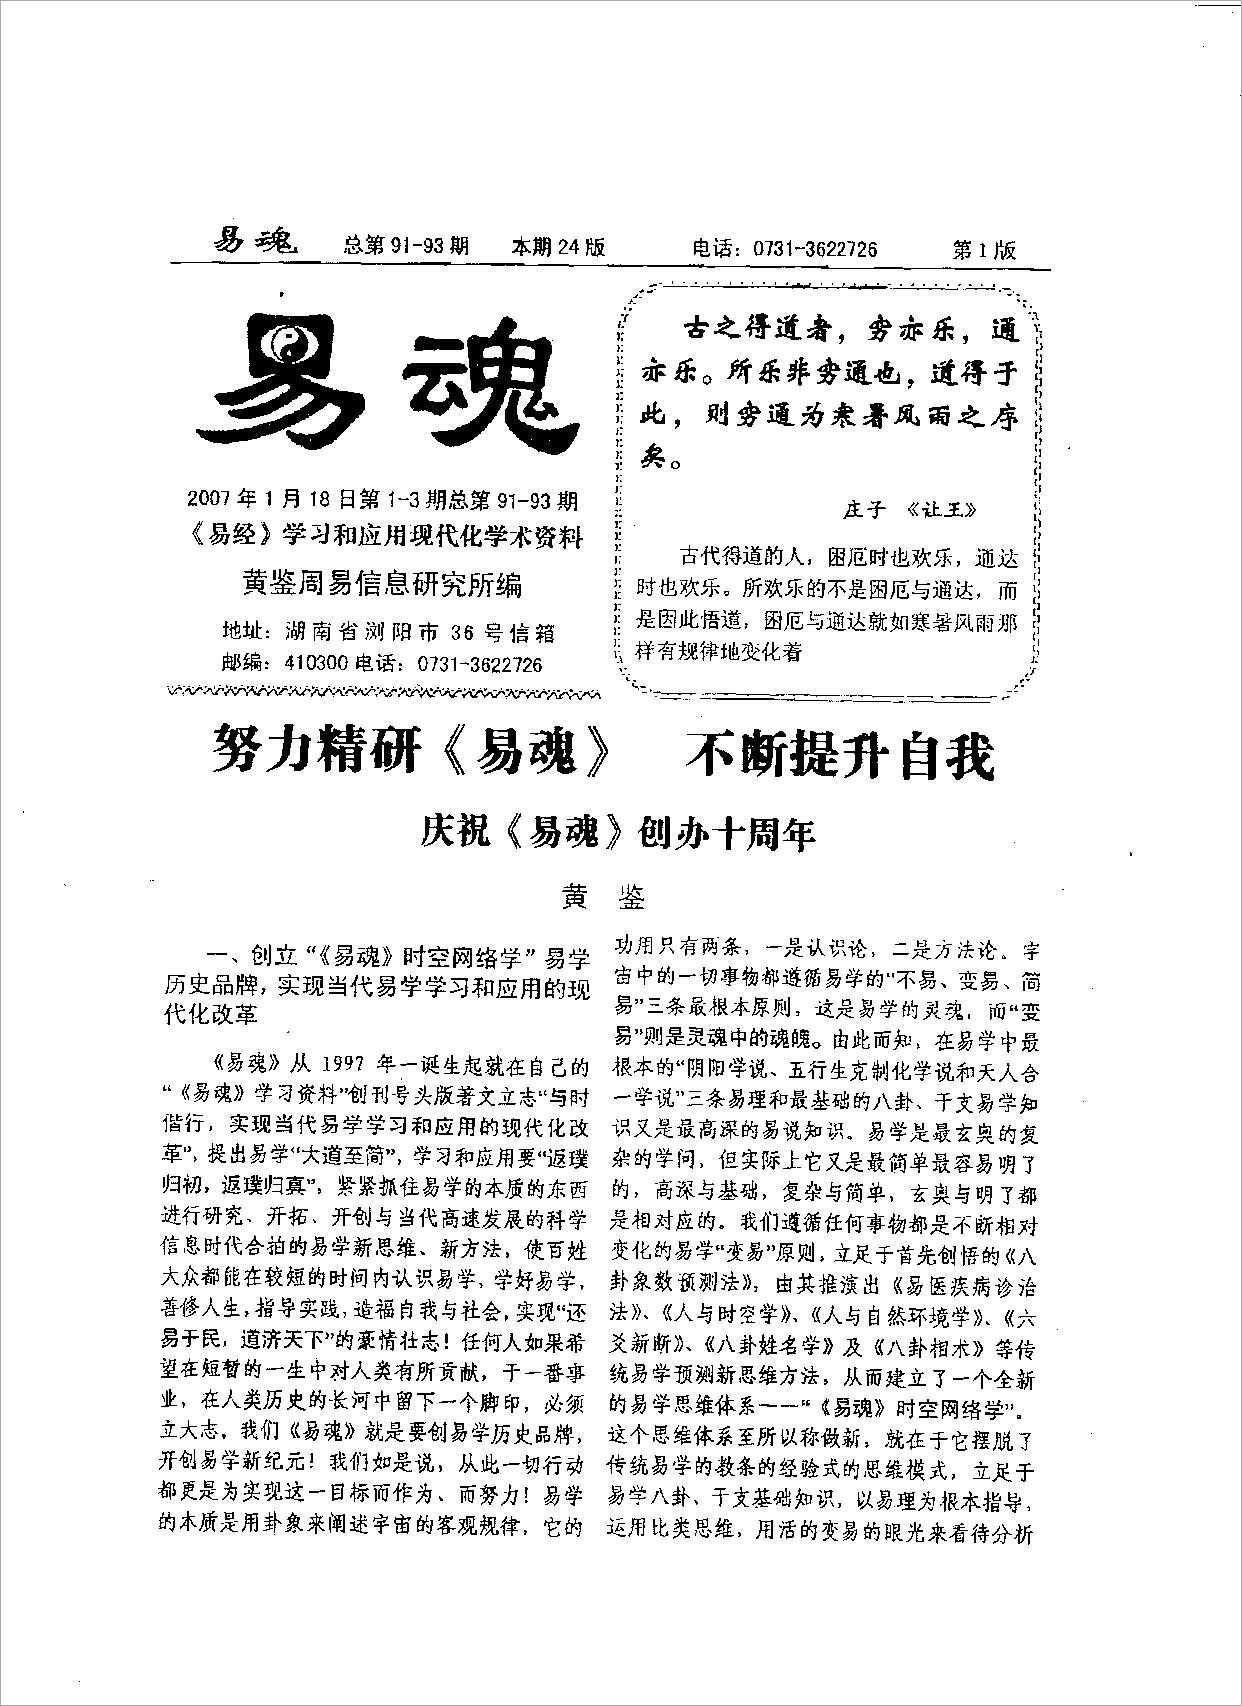 Huang Jian-Easy Soul Tabloid 91-100 80 pages.pdf